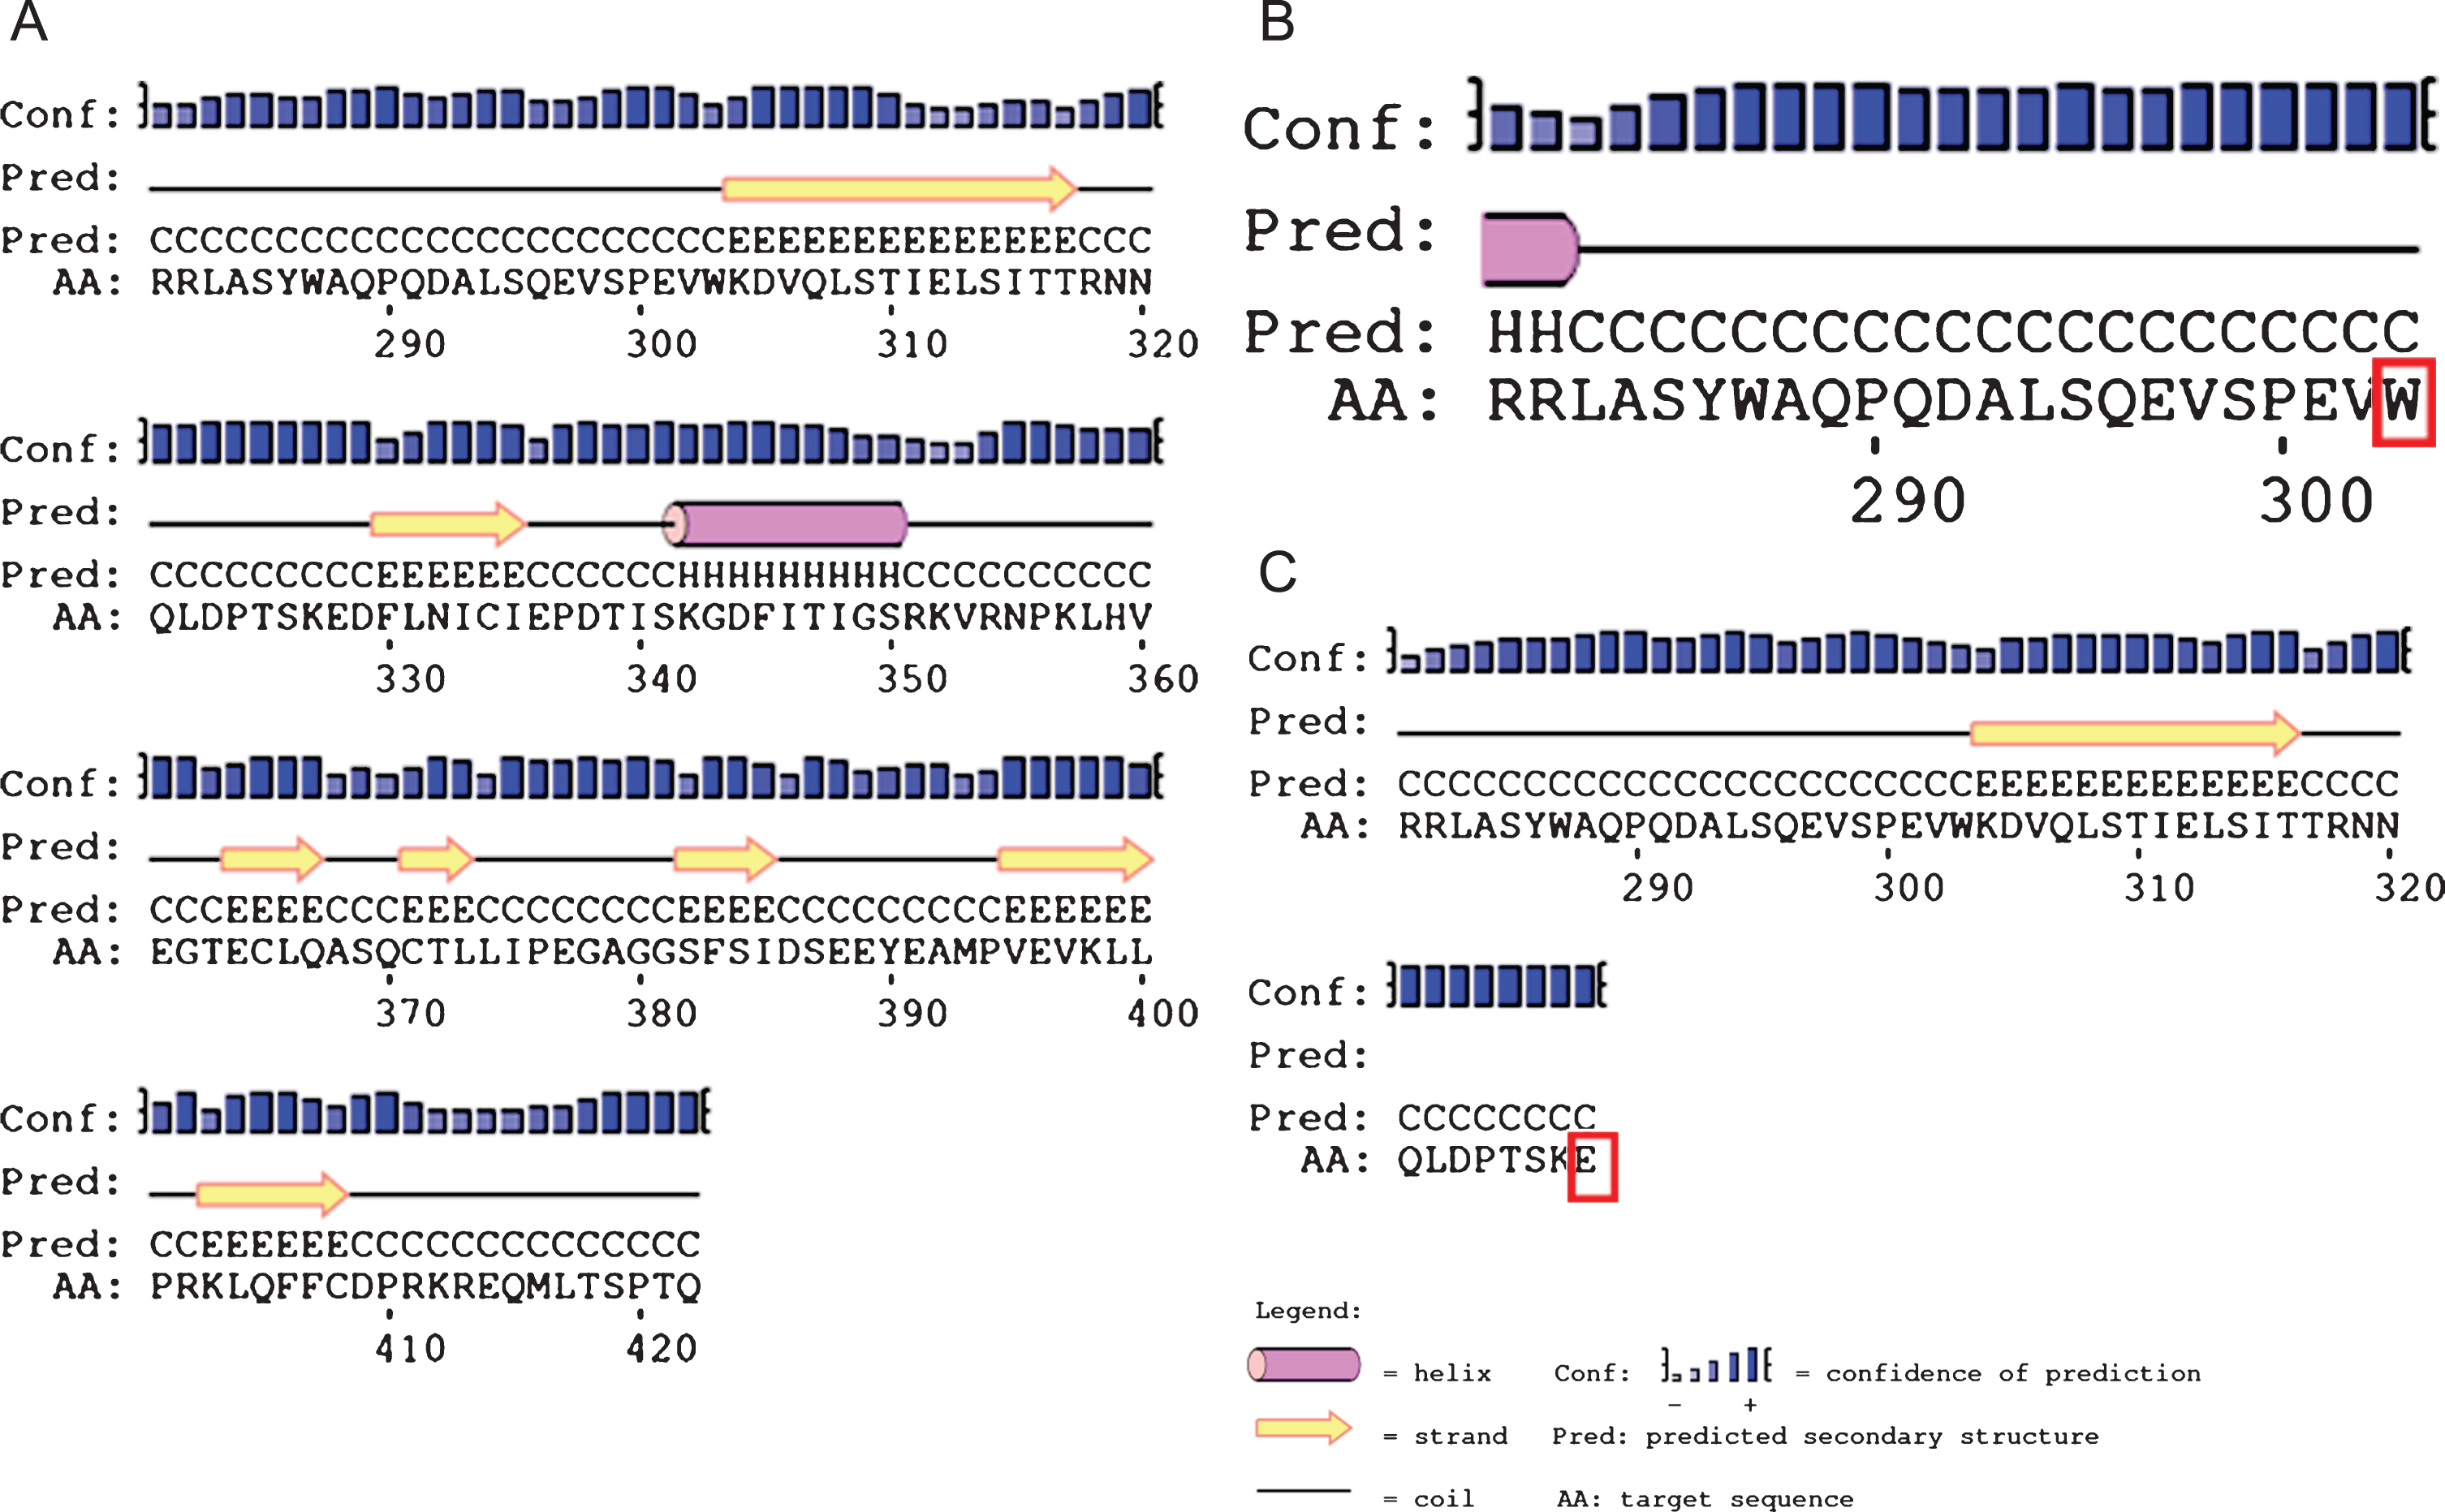 Secondary structure prediction of AGK protein sequence by PSIpred in patient 1 with c.909G>A (p.Trp303Ter) and c.982G>T (p.E328Ter) mutations. The amino acids 281–422, 281–303, 281–328 have been shown in sections A, B and C respectively. Section A represents wild type 422 amino acid protein. Section B and C represents no further formation of protein due to non sense mutation at 303 and 328 amnioacid which are highlighted in red boxes. H, Helix; E, strand; C, coil.